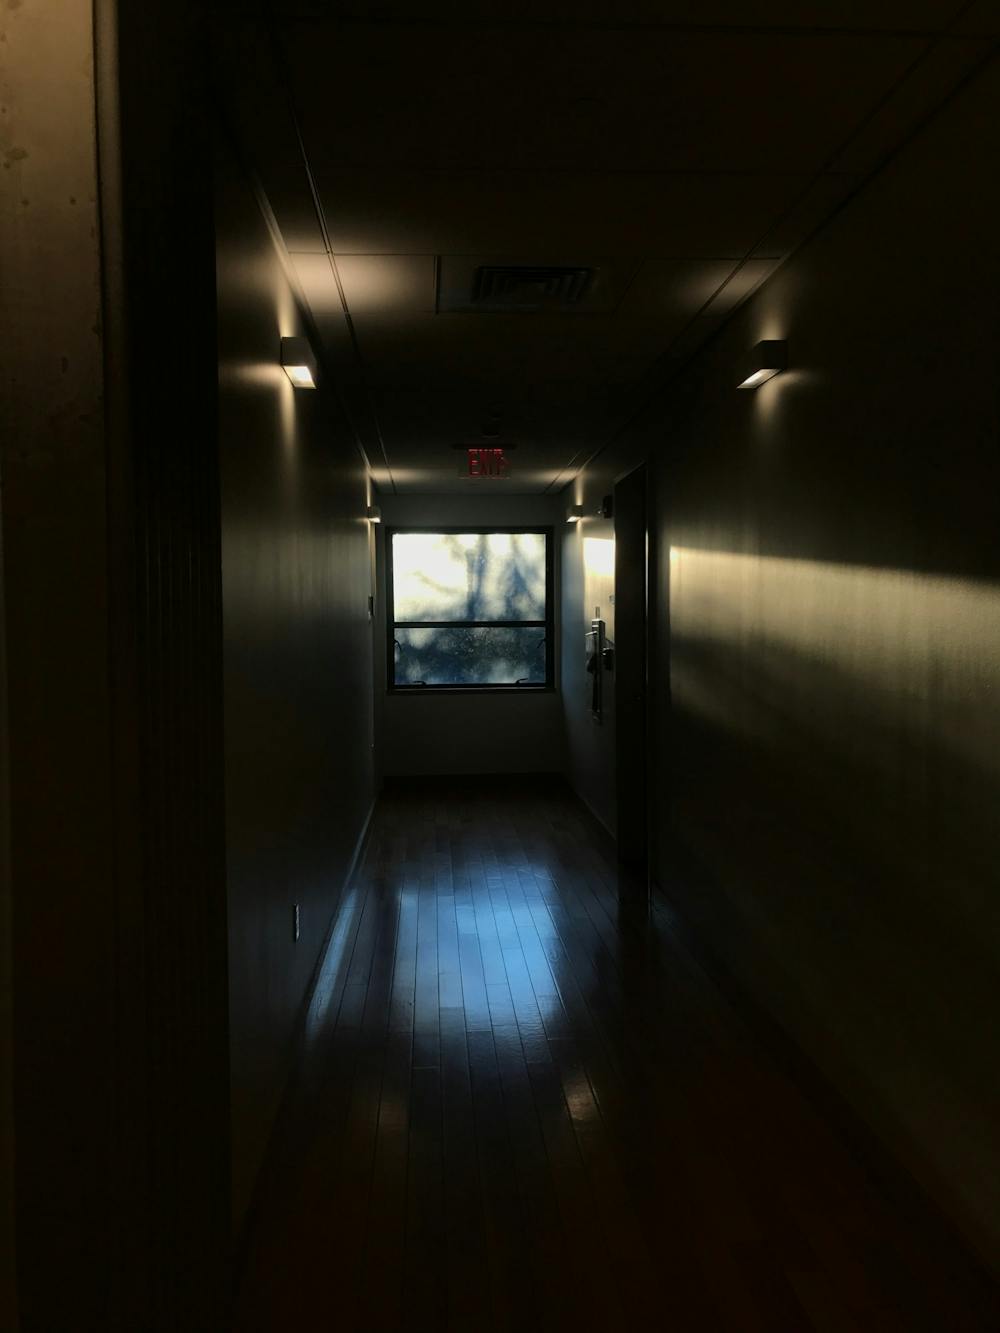 <h5>A view of the hallway from an isolation dorm.</h5>
<h6>Courtesy of Zora Alum ’22</h6>